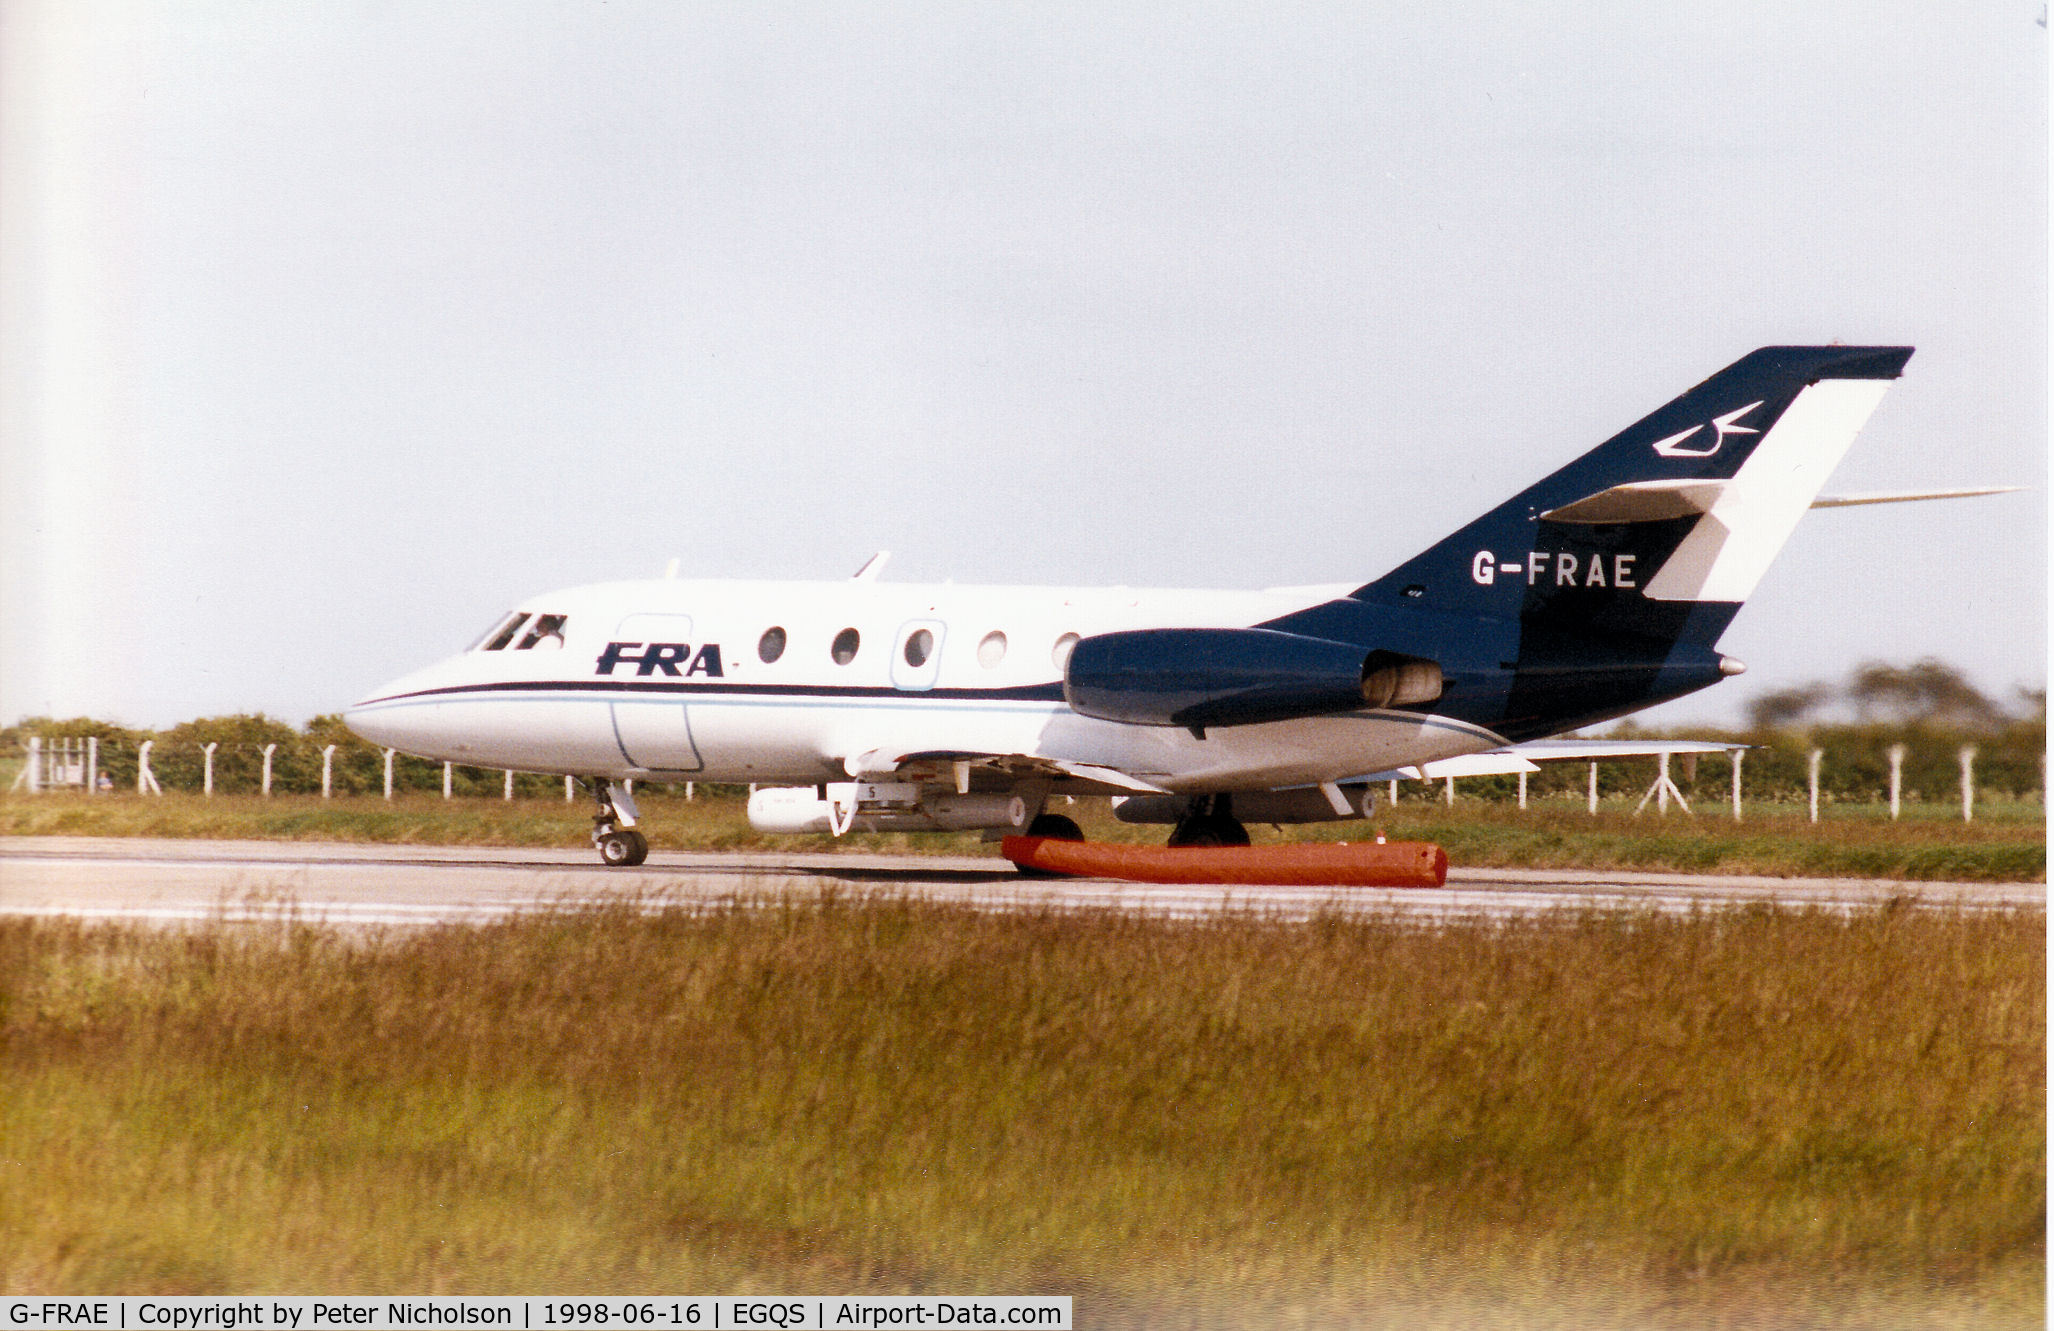 G-FRAE, 1973 Dassault Falcon (Mystere) 20E C/N 280, Target-towing equipped Falcon 20 of FRA preparing for take-off on Runway 05 at RAF Lossiemouth for a mission during the 1998 Joint Maritime Course.